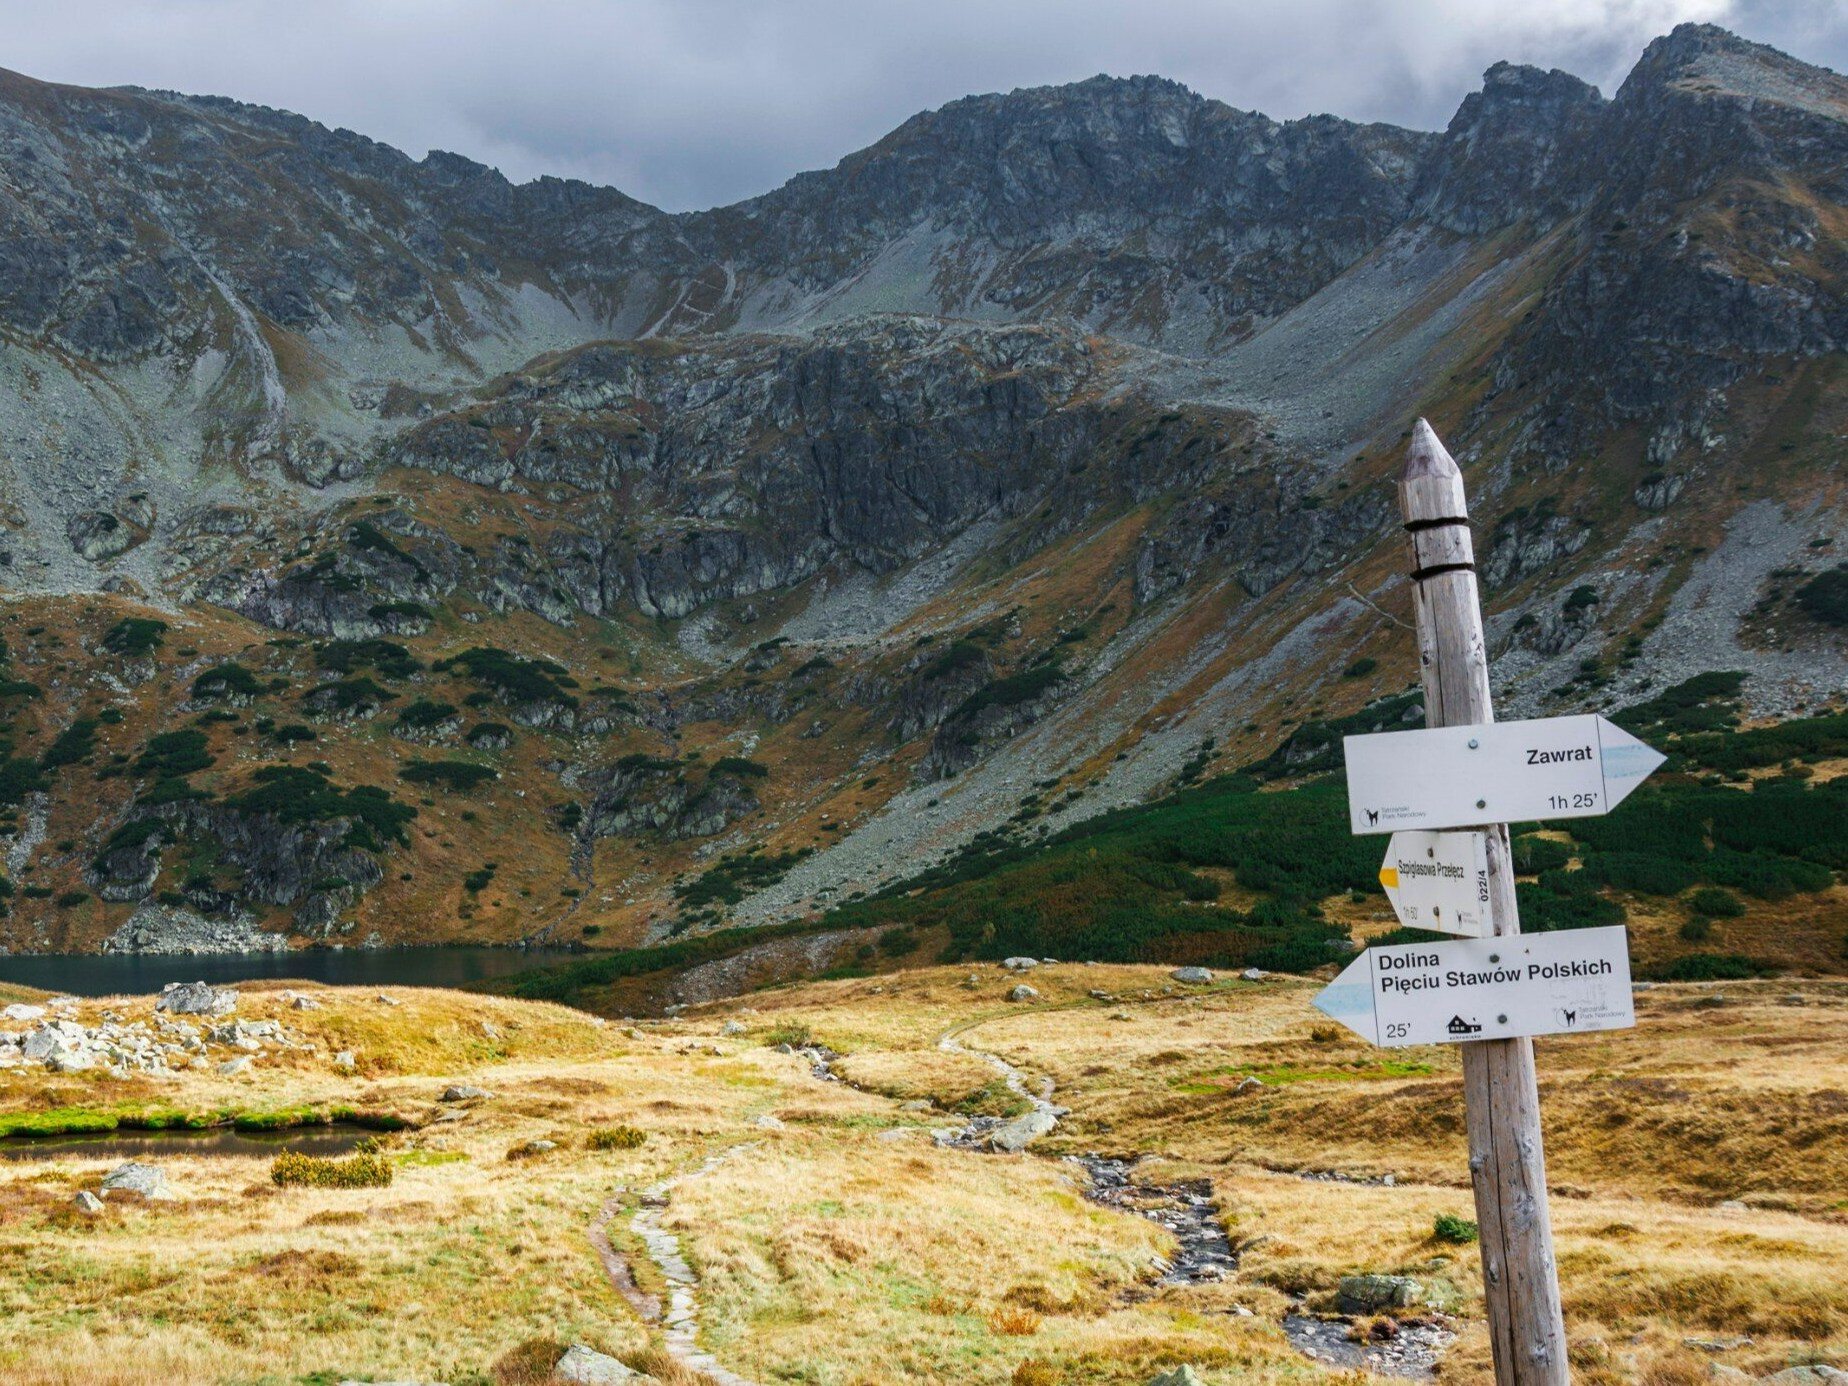 TPN closes the trail.  This is one of the most popular routes in the Tatra Mountains